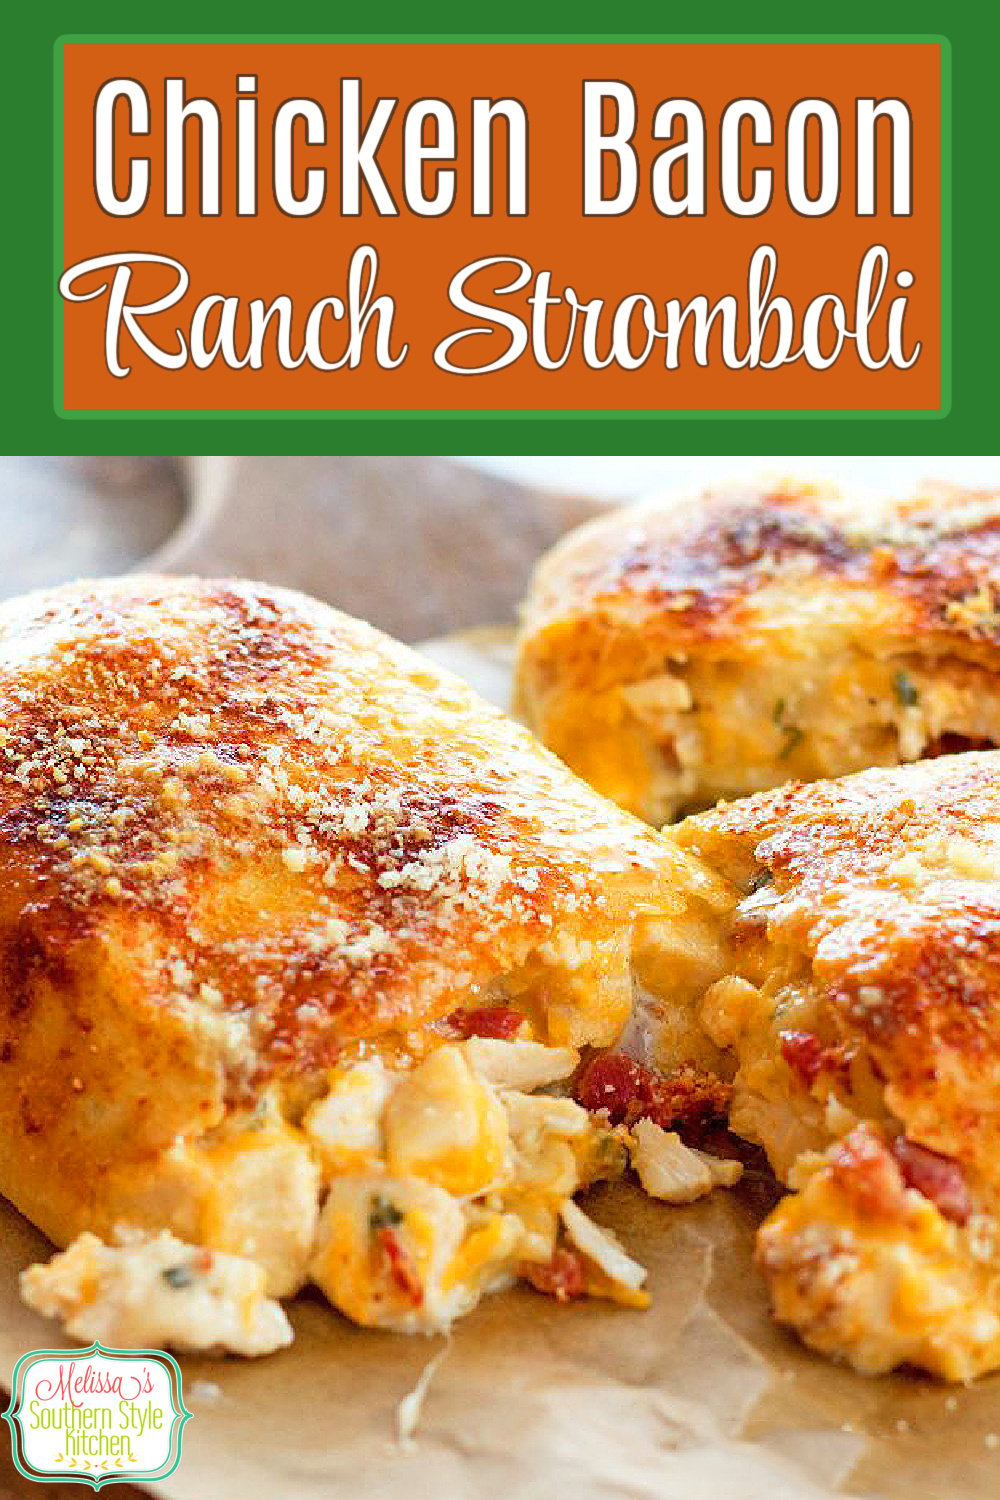 This family-style stromboli is filled with chicken, bacon, ranch and plenty of cheese #chickenstromboli #strombolirecipes #chickenbaconranch #bacon #easychickenrecipes #dinner #dinnerideas #30minutemeals #pizza #southernfood #southernrecipes via @melissasssk